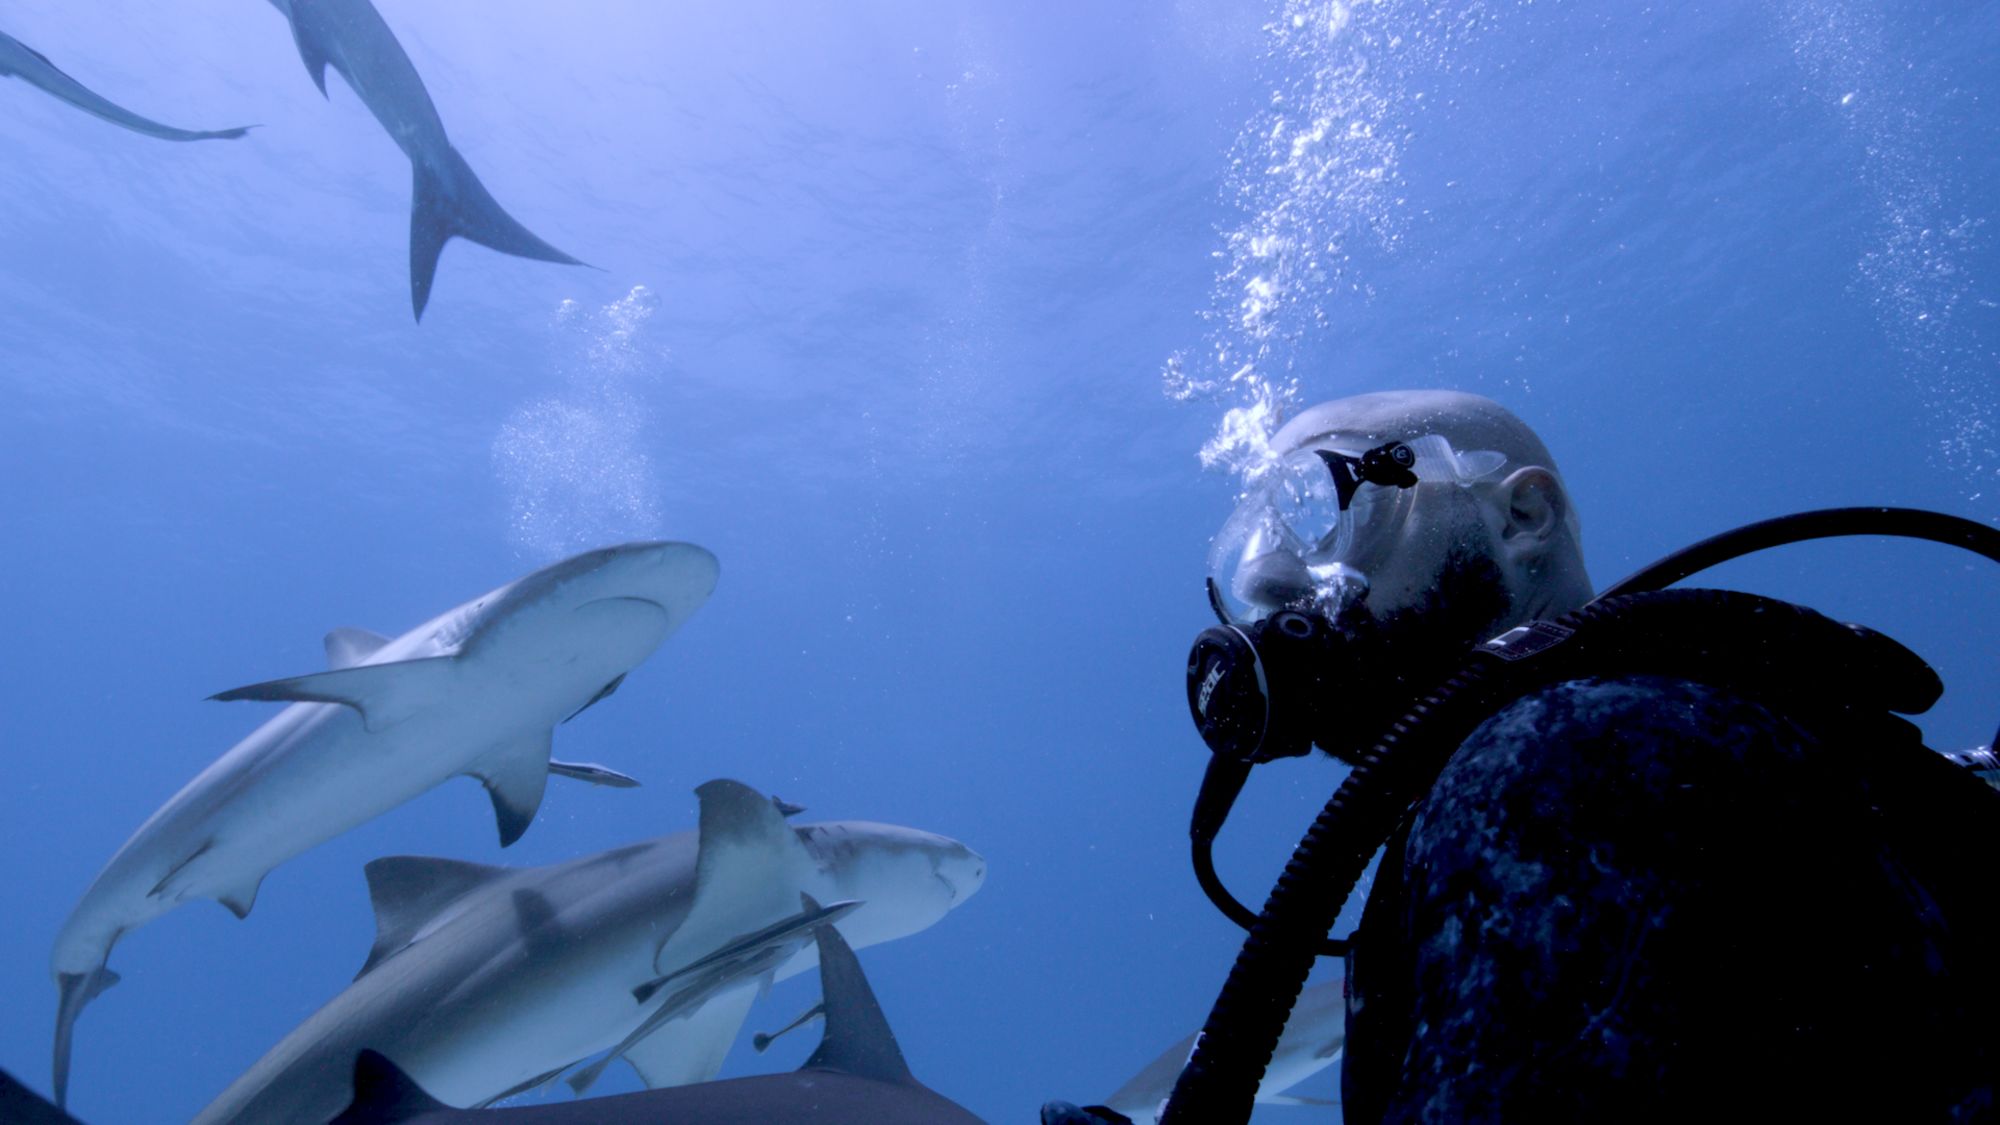 Shark diving is "one of the most profound experiences I’ve ever had," writes Boris Sanchez.